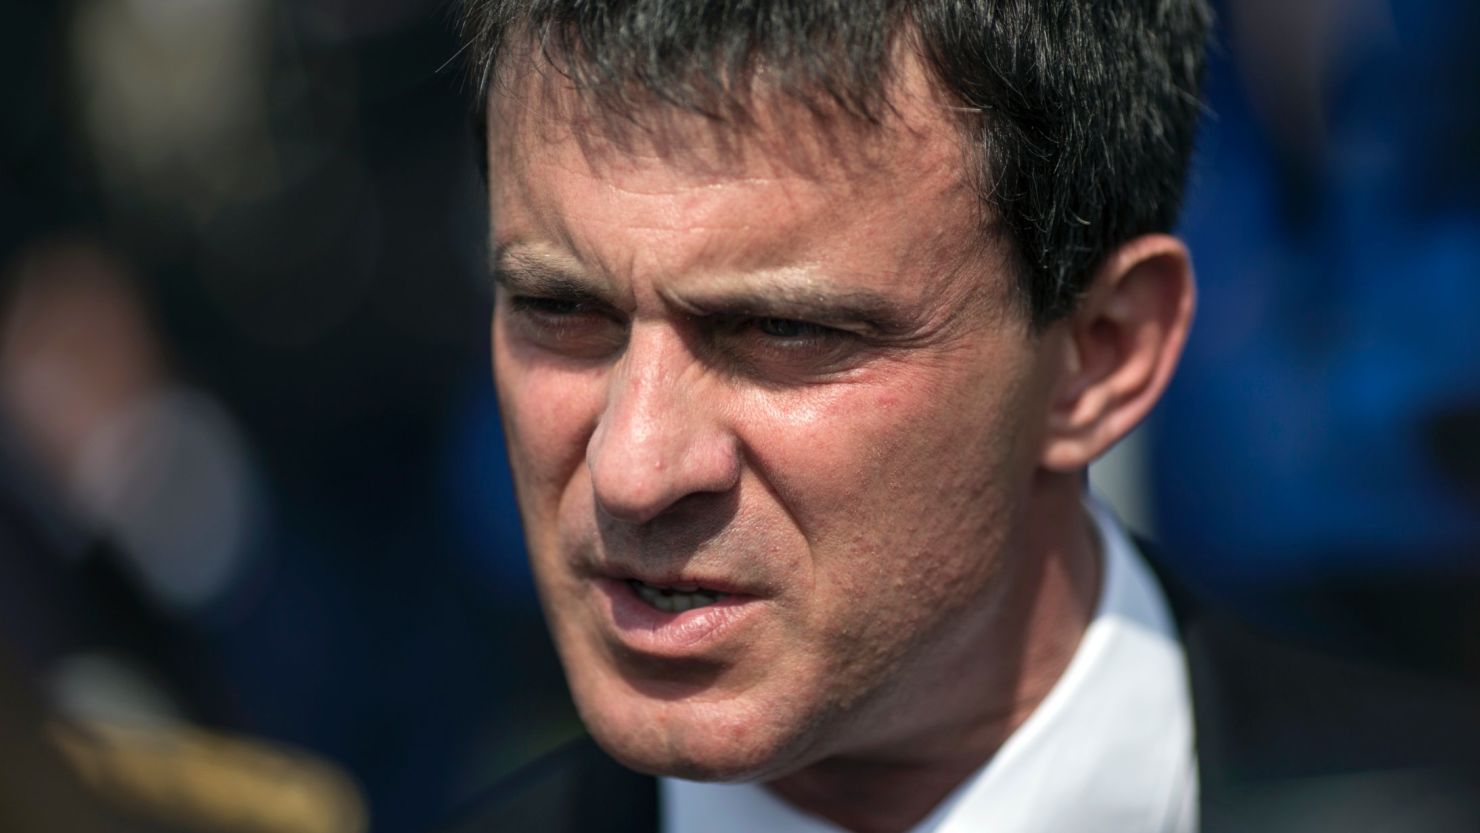 French Interior Minister Manuel Valls at the Officers School of the National Gendarmerie in Melun on July 2, 2013.